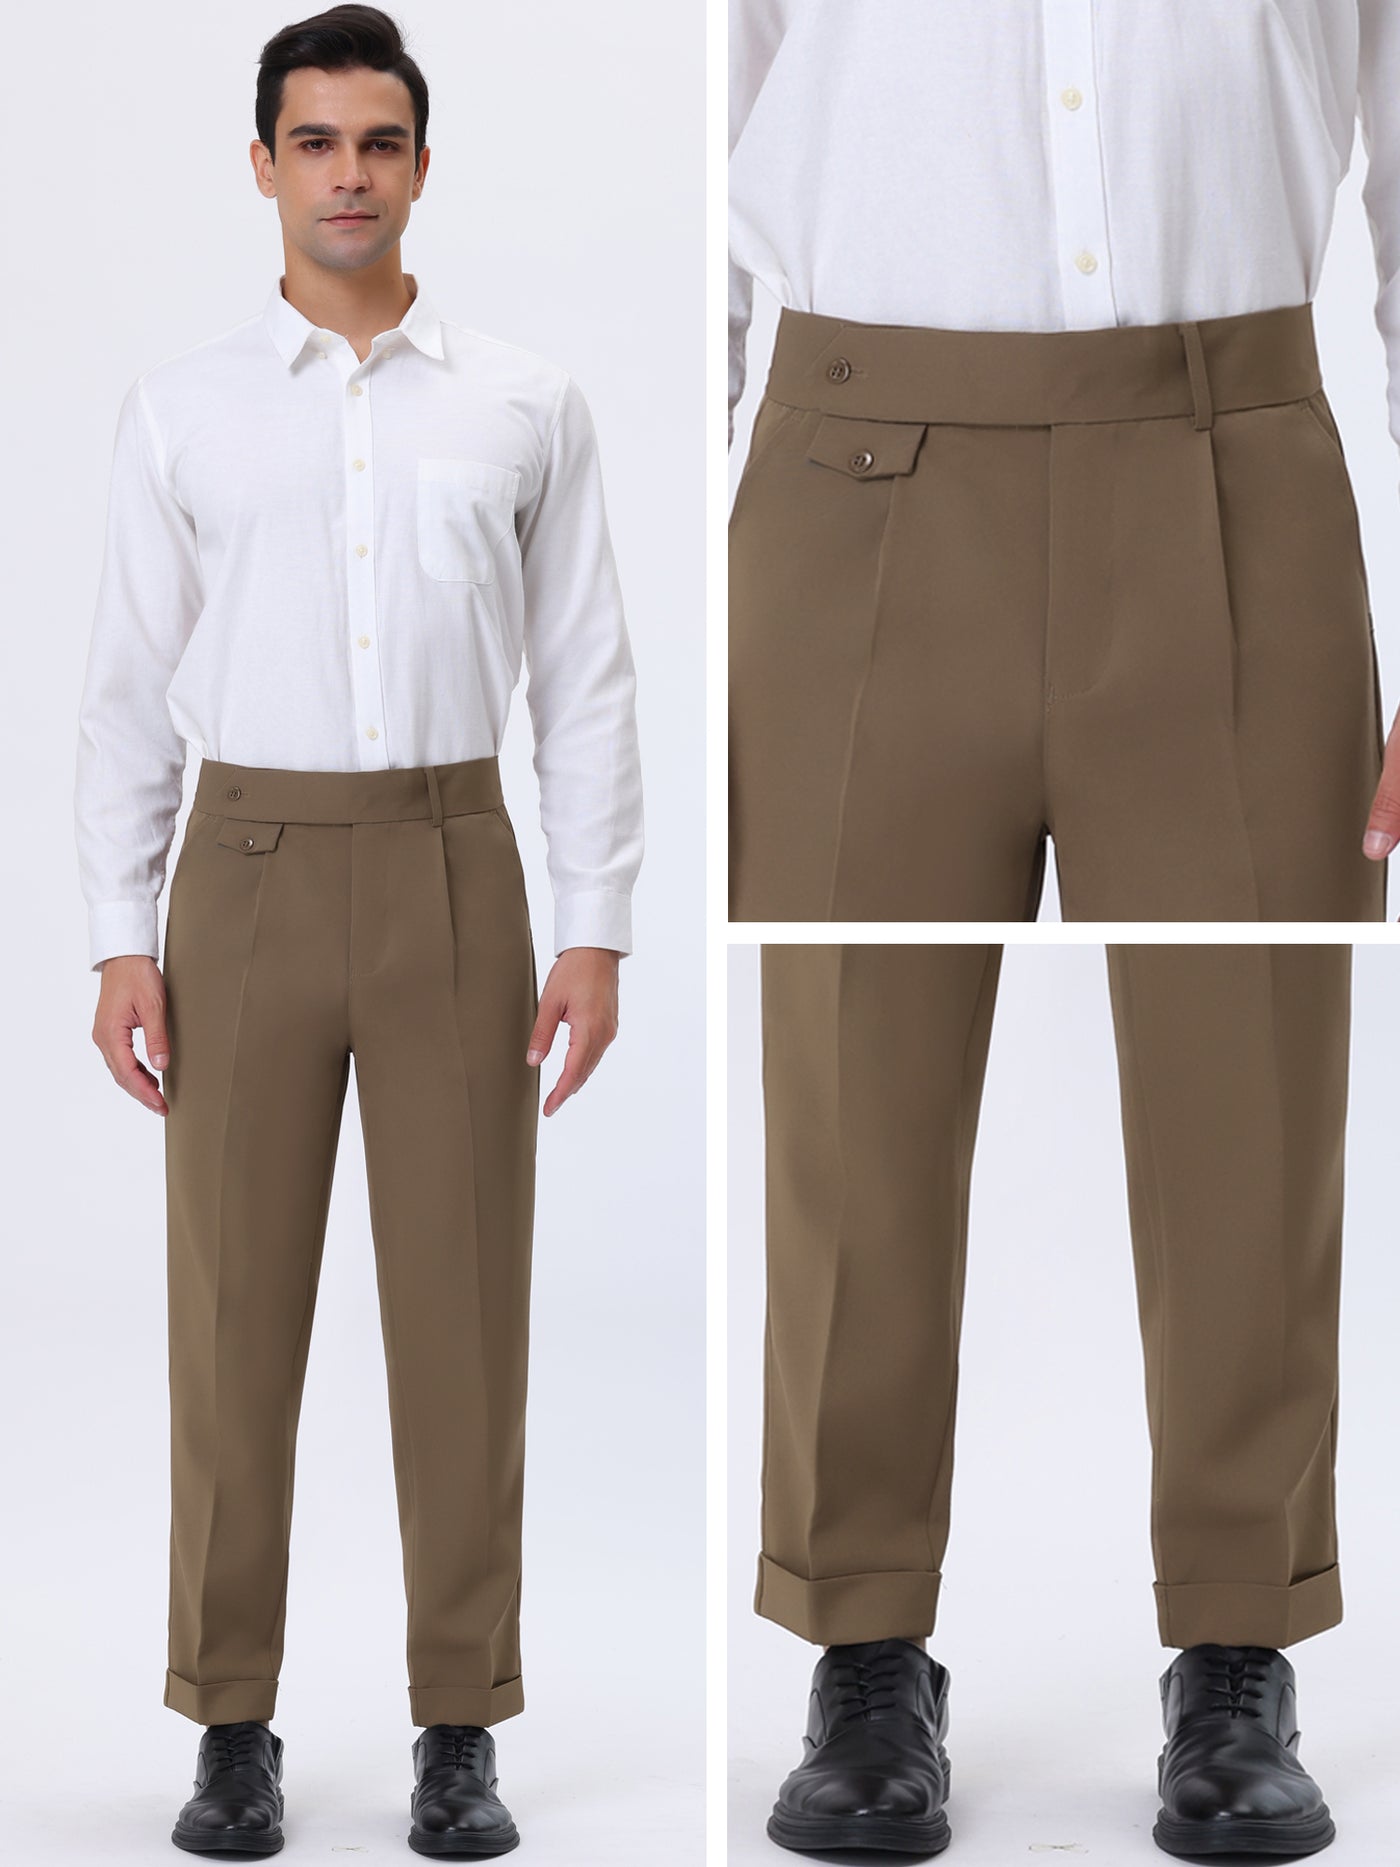 Bublédon Men's Tapered Trousers Solid Extended Waistband Dress Pants